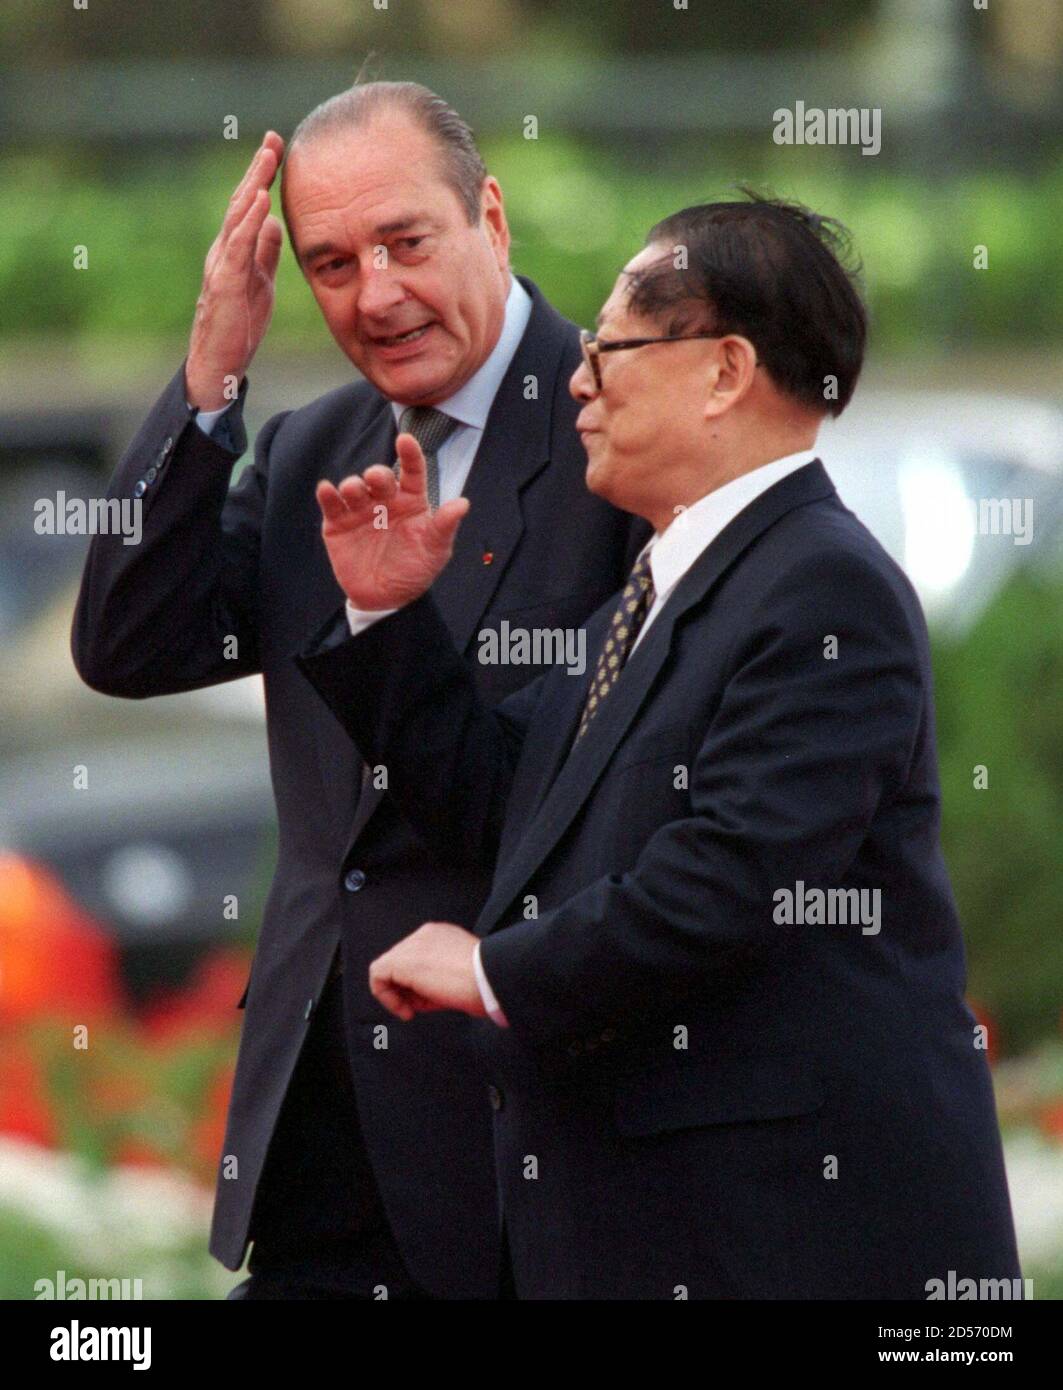 France's President Jacques Chirac (L) steadies his hair as China's  President and Communist Party boss Jiang Zemin (R) makes a point during  windy welcome ceremonies at Beijing's Great Hall of the People